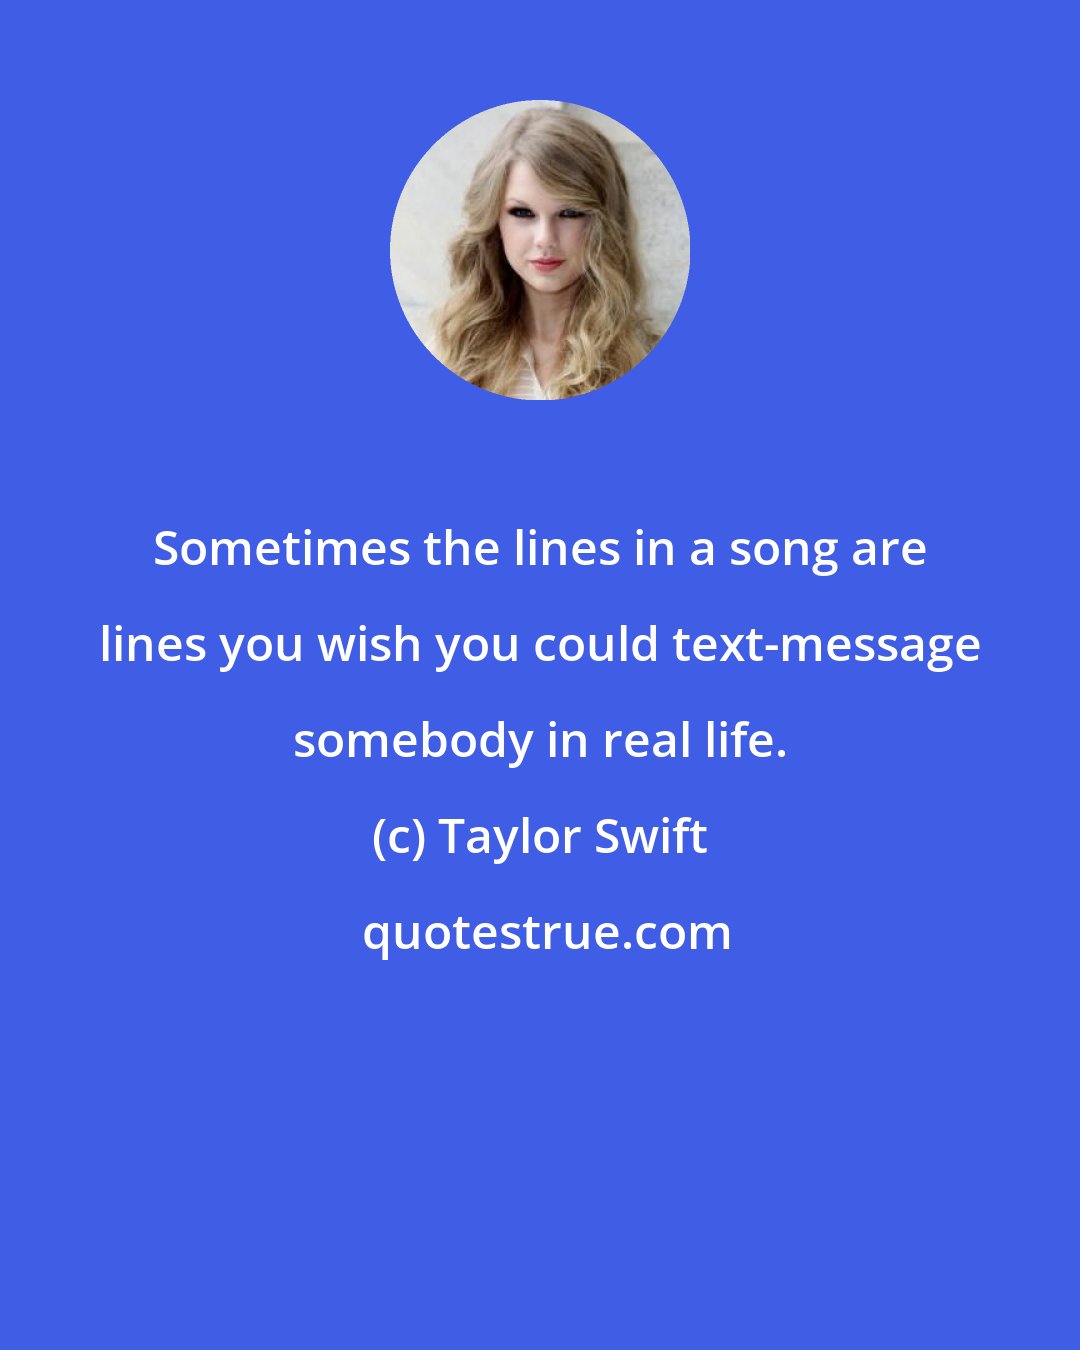 Taylor Swift: Sometimes the lines in a song are lines you wish you could text-message somebody in real life.